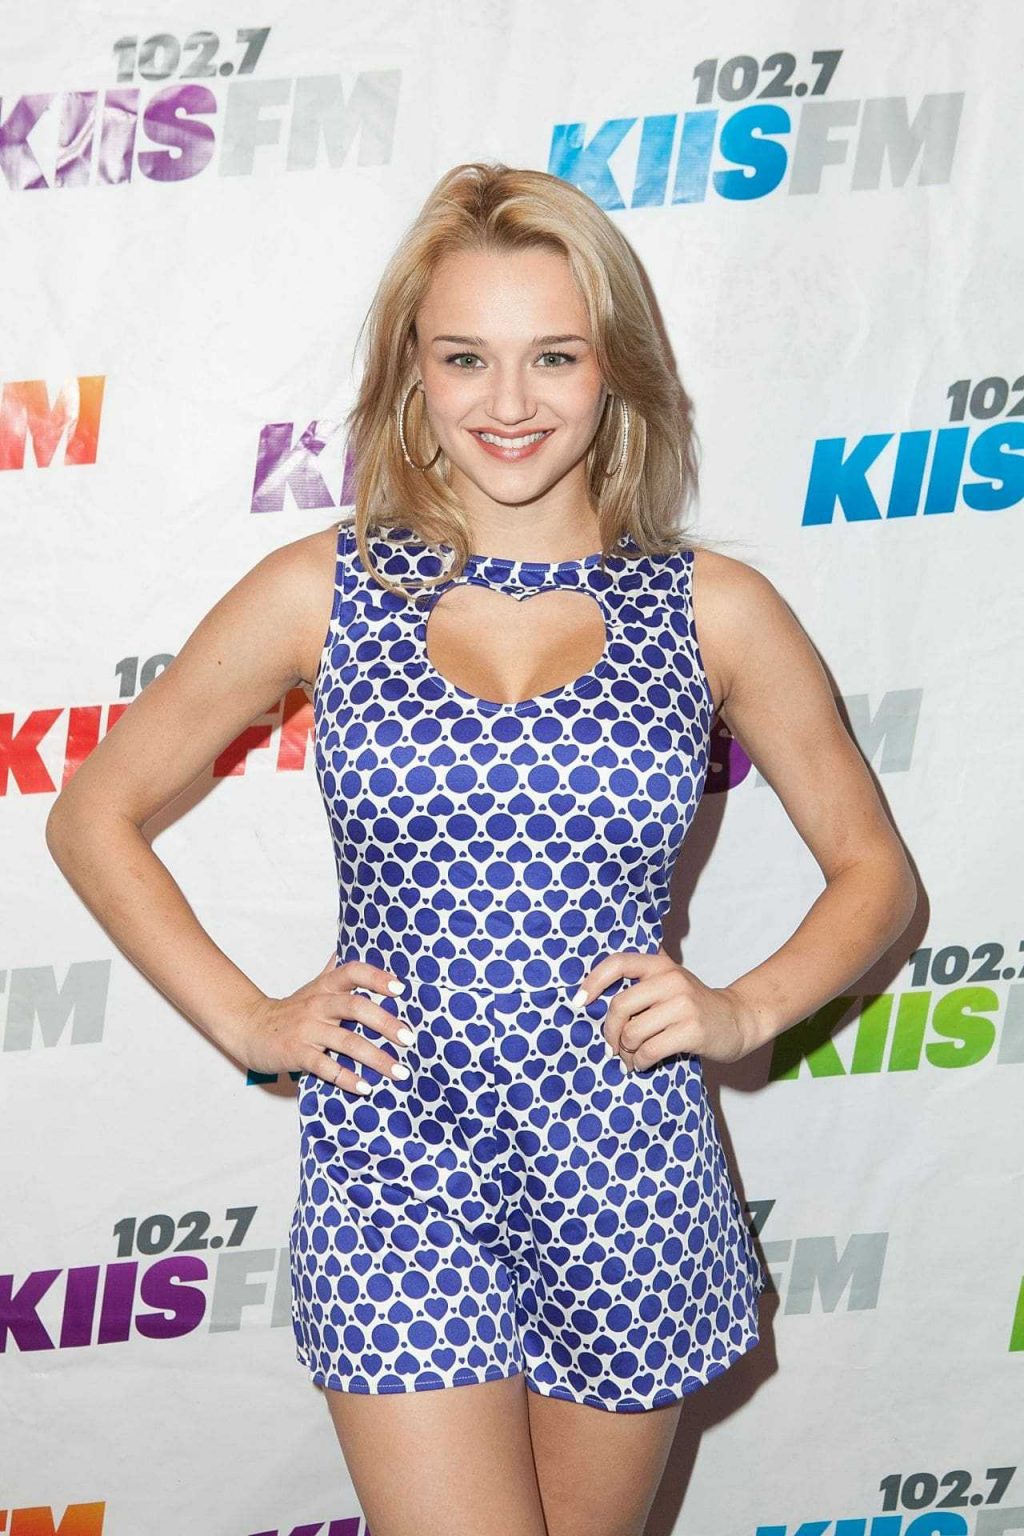 51 Hunter King Nude Pictures Display Her As A Skilled Performer 59